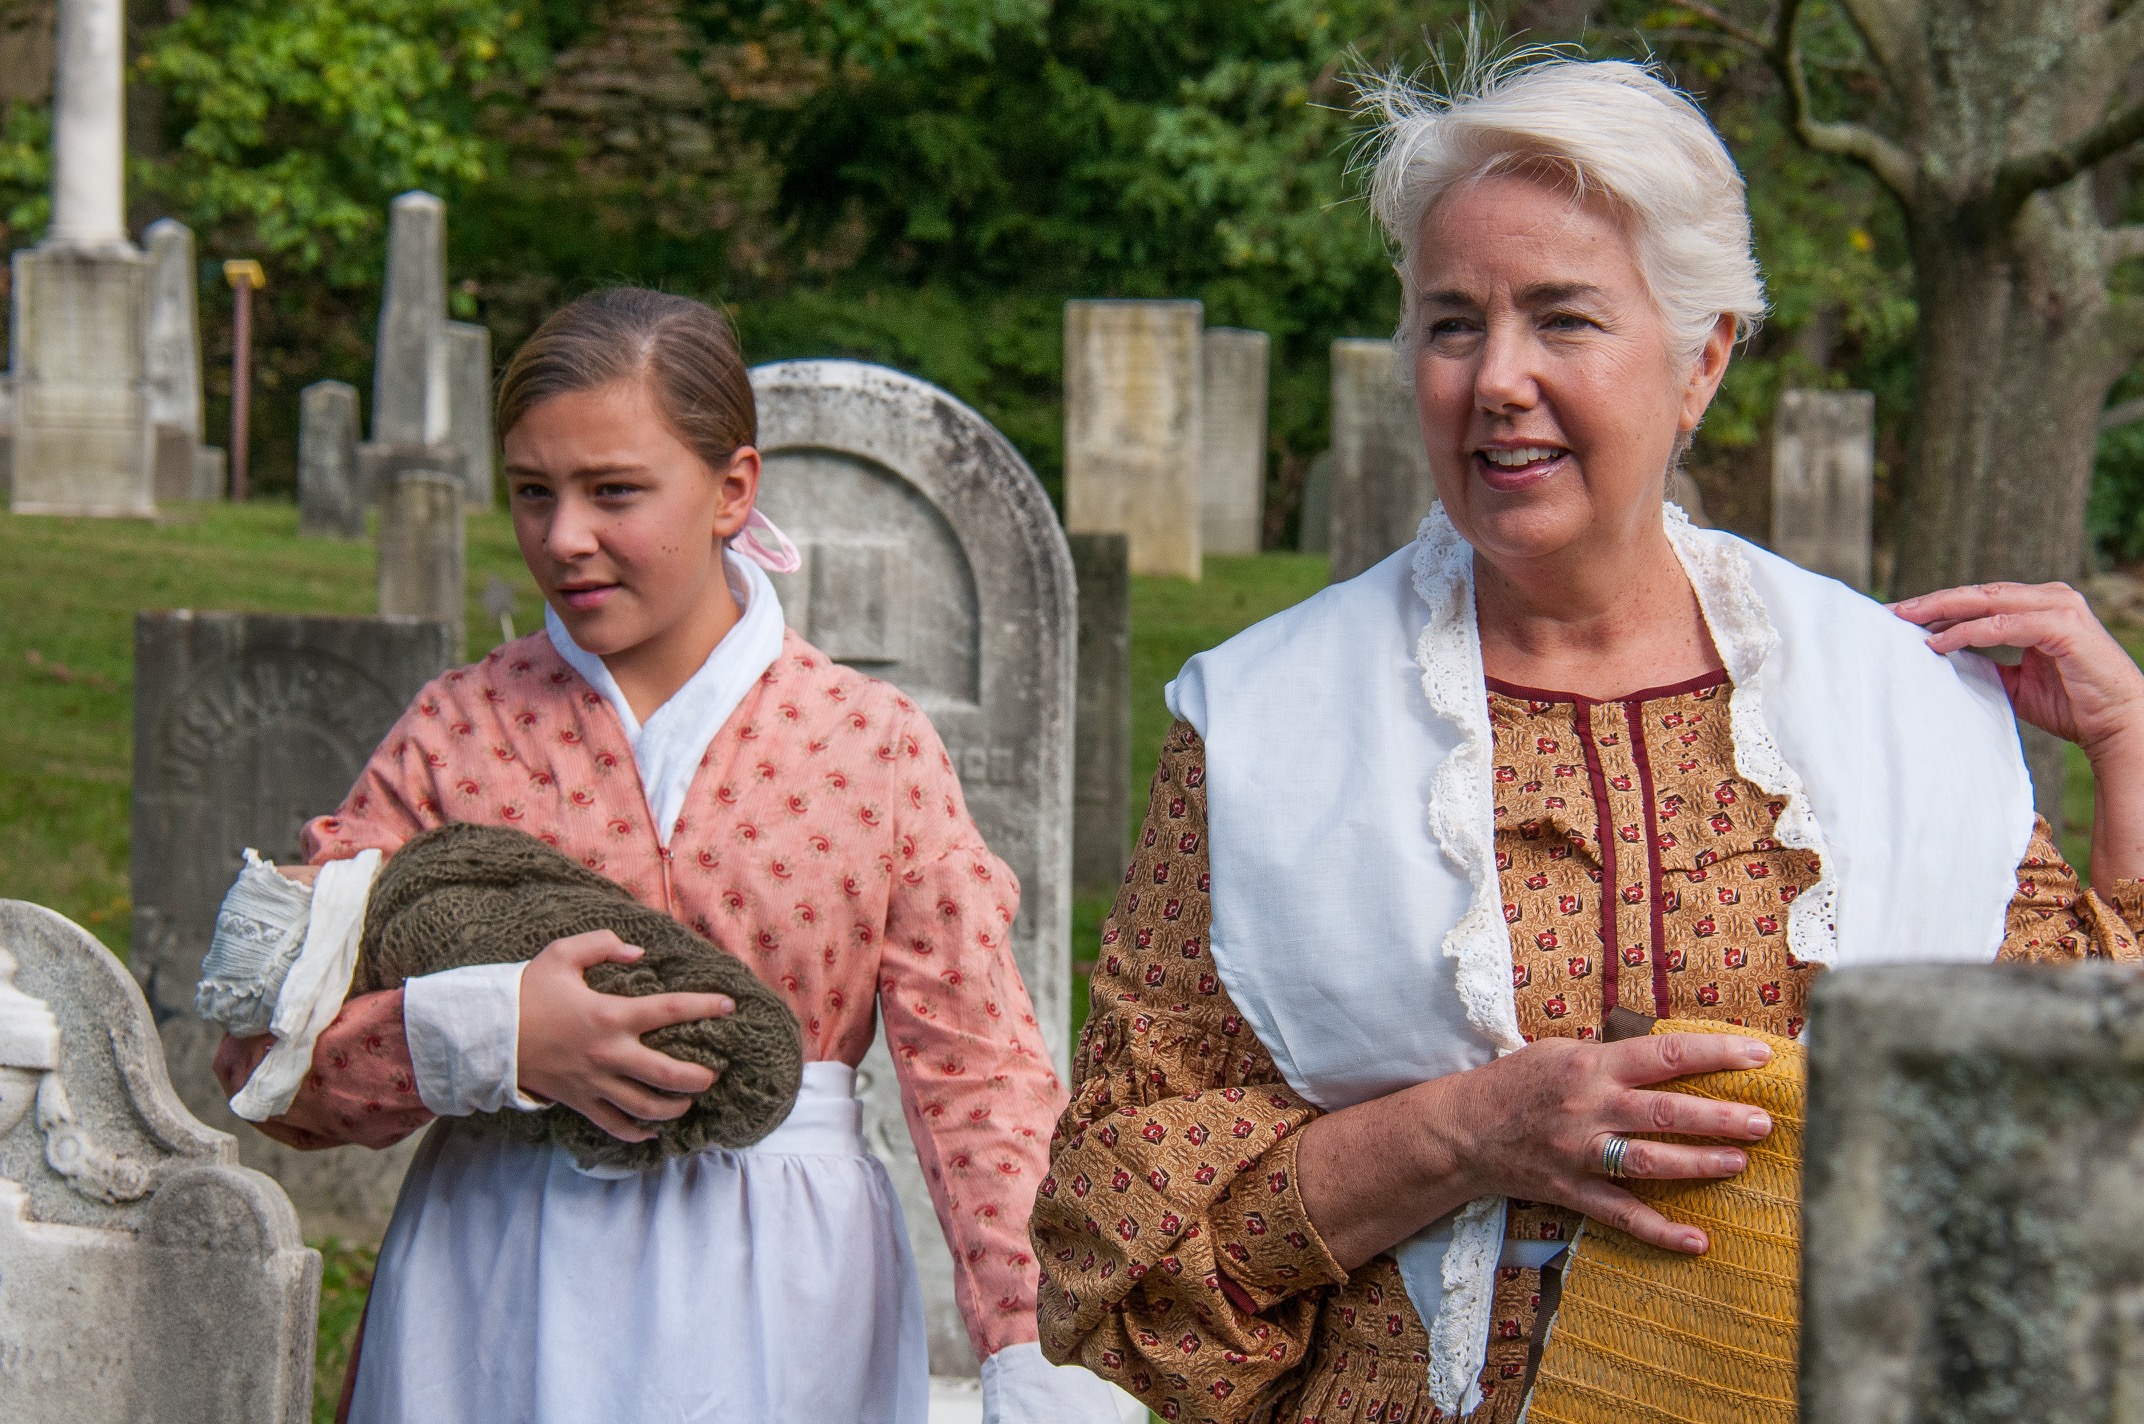  Sally Leithauser as Mary Root (holding her infant sister, Dameris) and Deb Eddy as Mary Barret Root. 